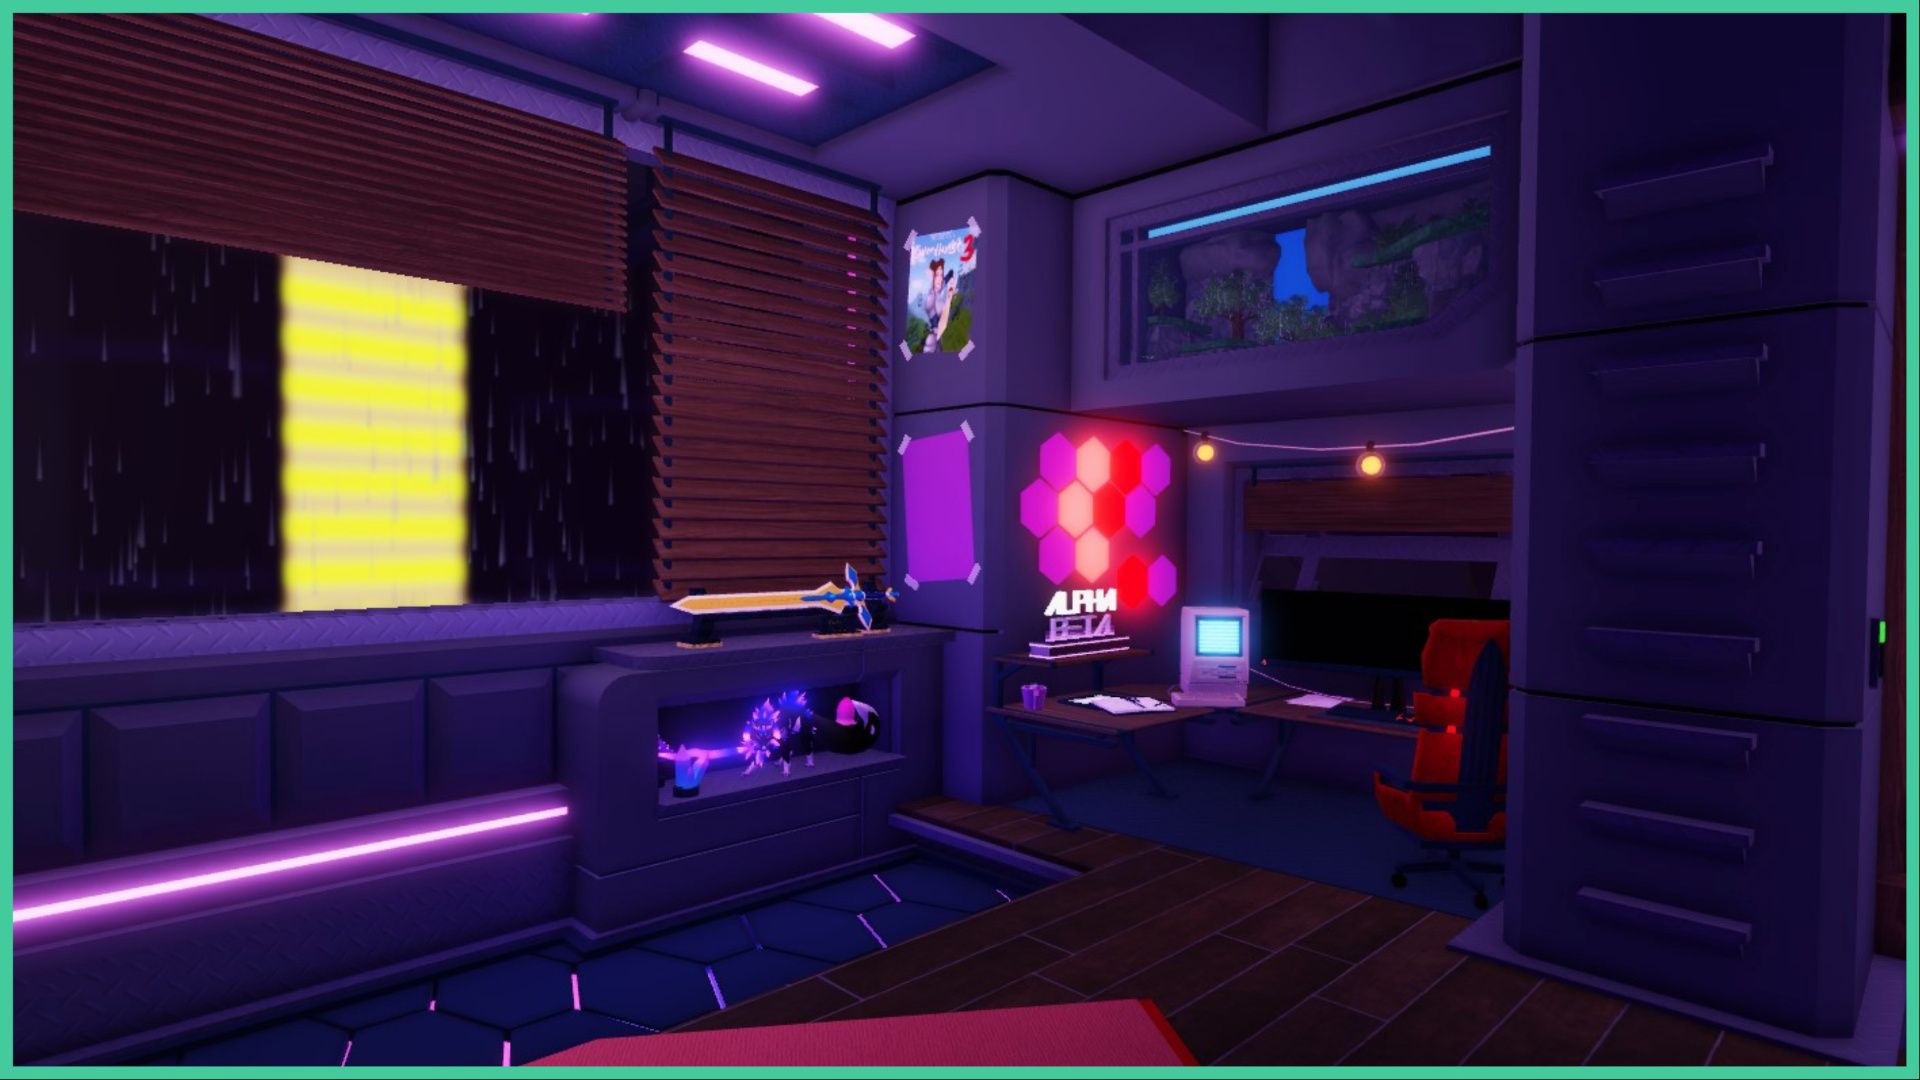 feature image for our swordburst 3 codes guide, the image features a screenshot from the start of the game as it loads, which is of a cyberpunk-style bedroom, with a computer desk, posters taped to the walls, a sword on display on a shelf with various figurines underneath, there are blinds that are half covering the windows as it rains outside with the glow of another building, the entire bedroom is lit up by the LED lights